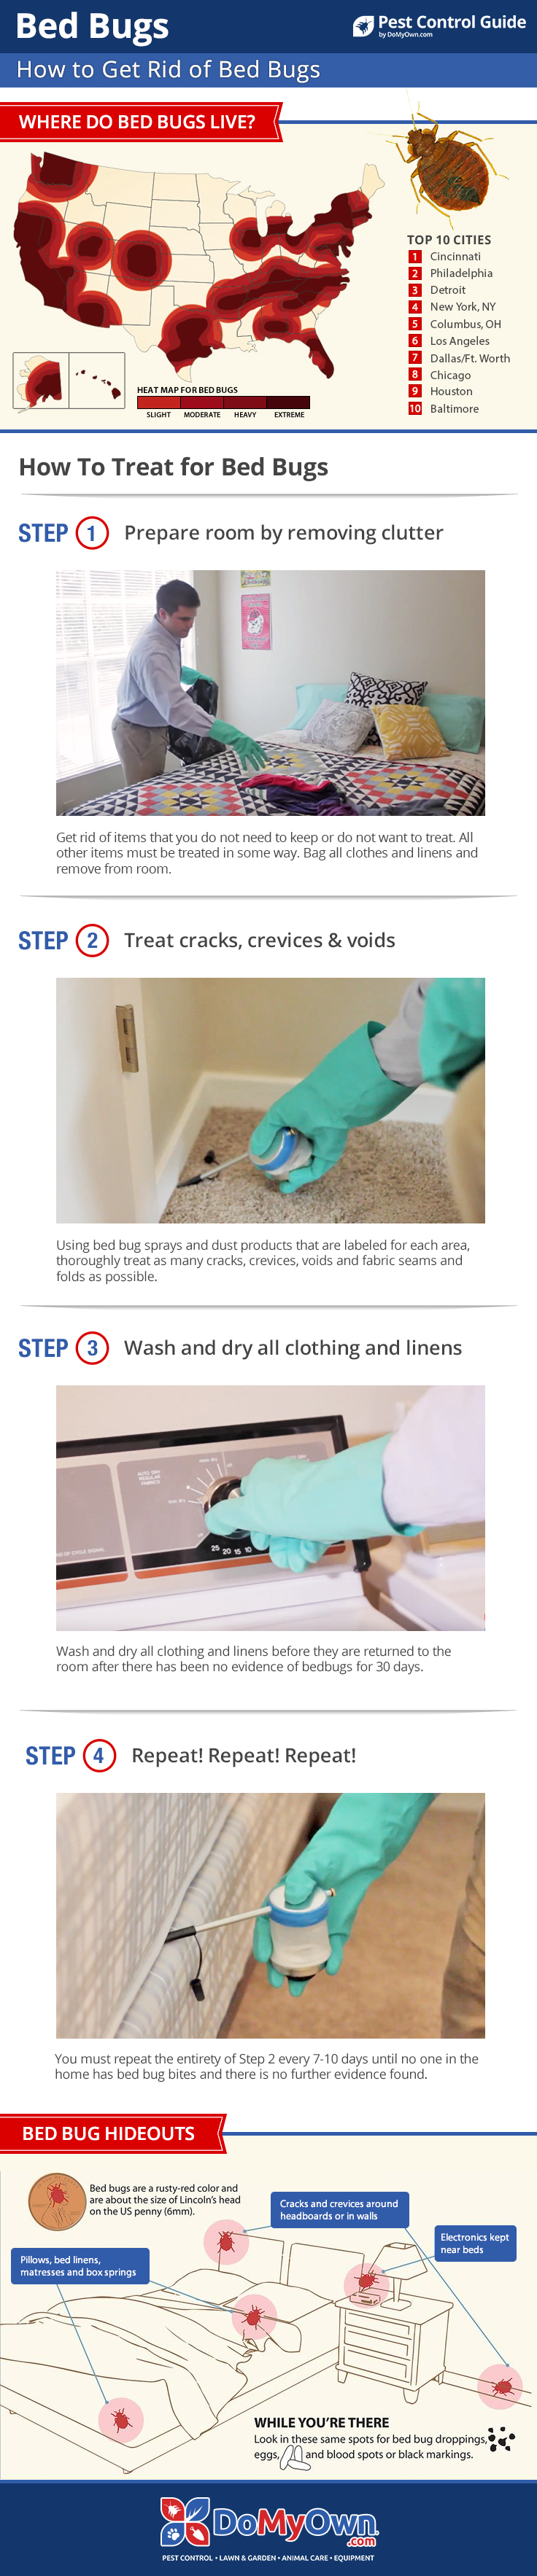 How To Get Rid Of Kill Bed Bugs Yourself Diy Bed Bug Treatment and Killing Bed Bugs In Clothes